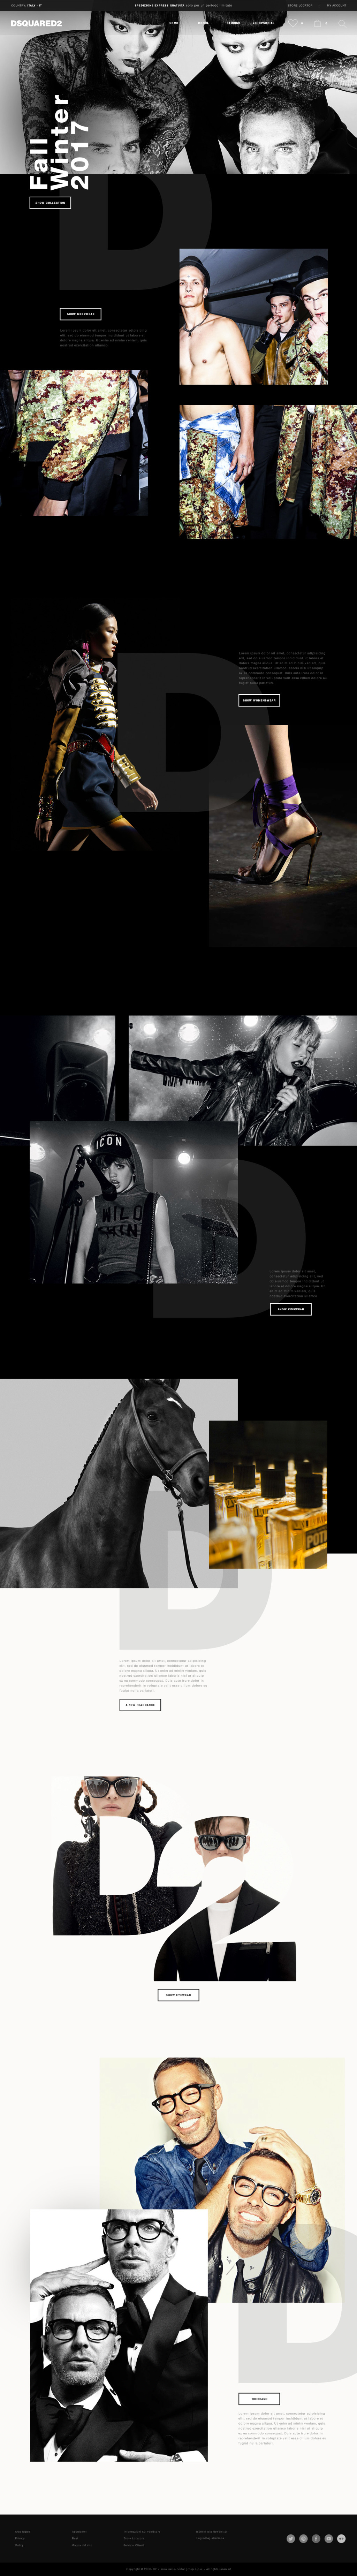 dsquared2-homepage